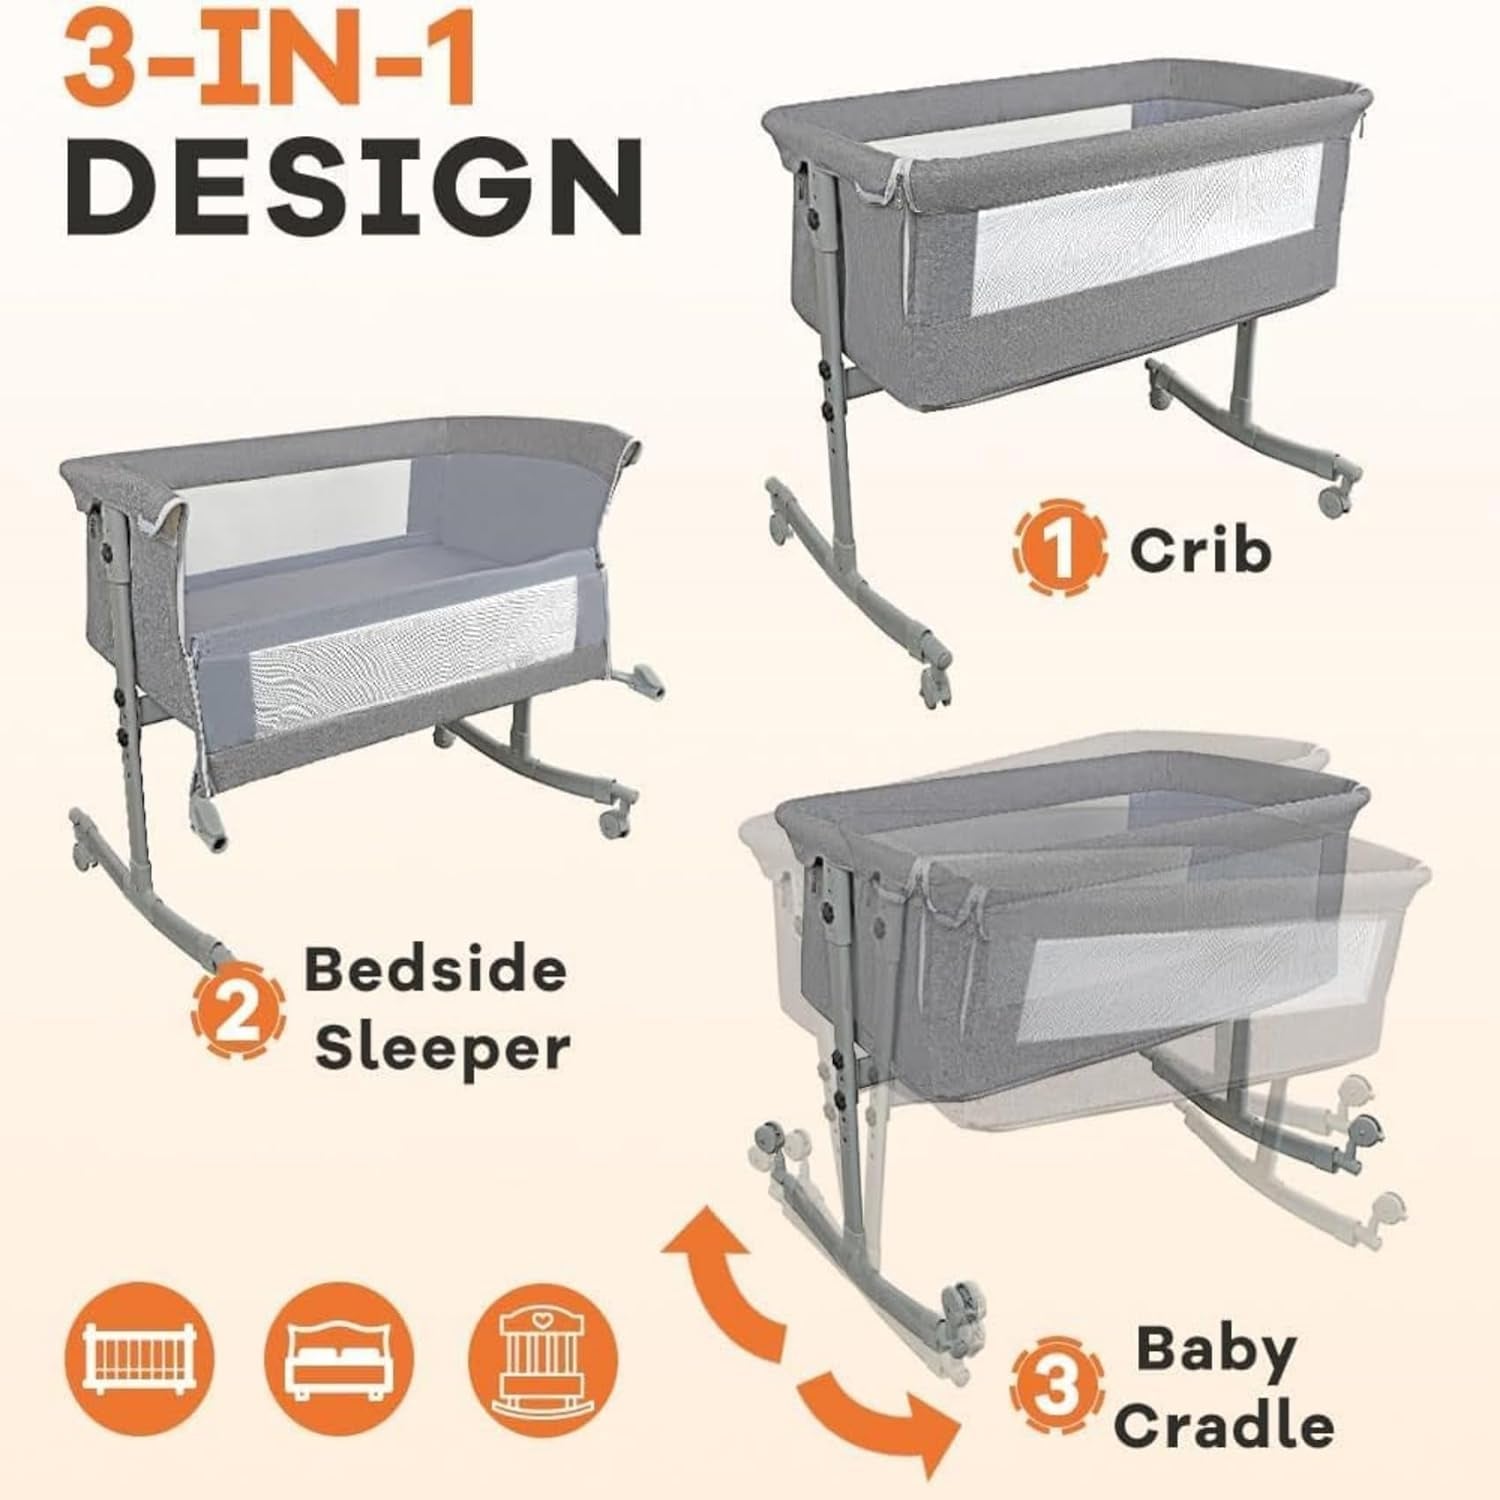 Bedside Crib for Baby, 3 in 1 Bassinet with Large Curvature Cradle, Bedside Sleeper Adjustable and Movable beside Bassinet with Mosquito Nets, Safety Certificattion Guarantee, Bassinet Bedding Sets - Design By Technique